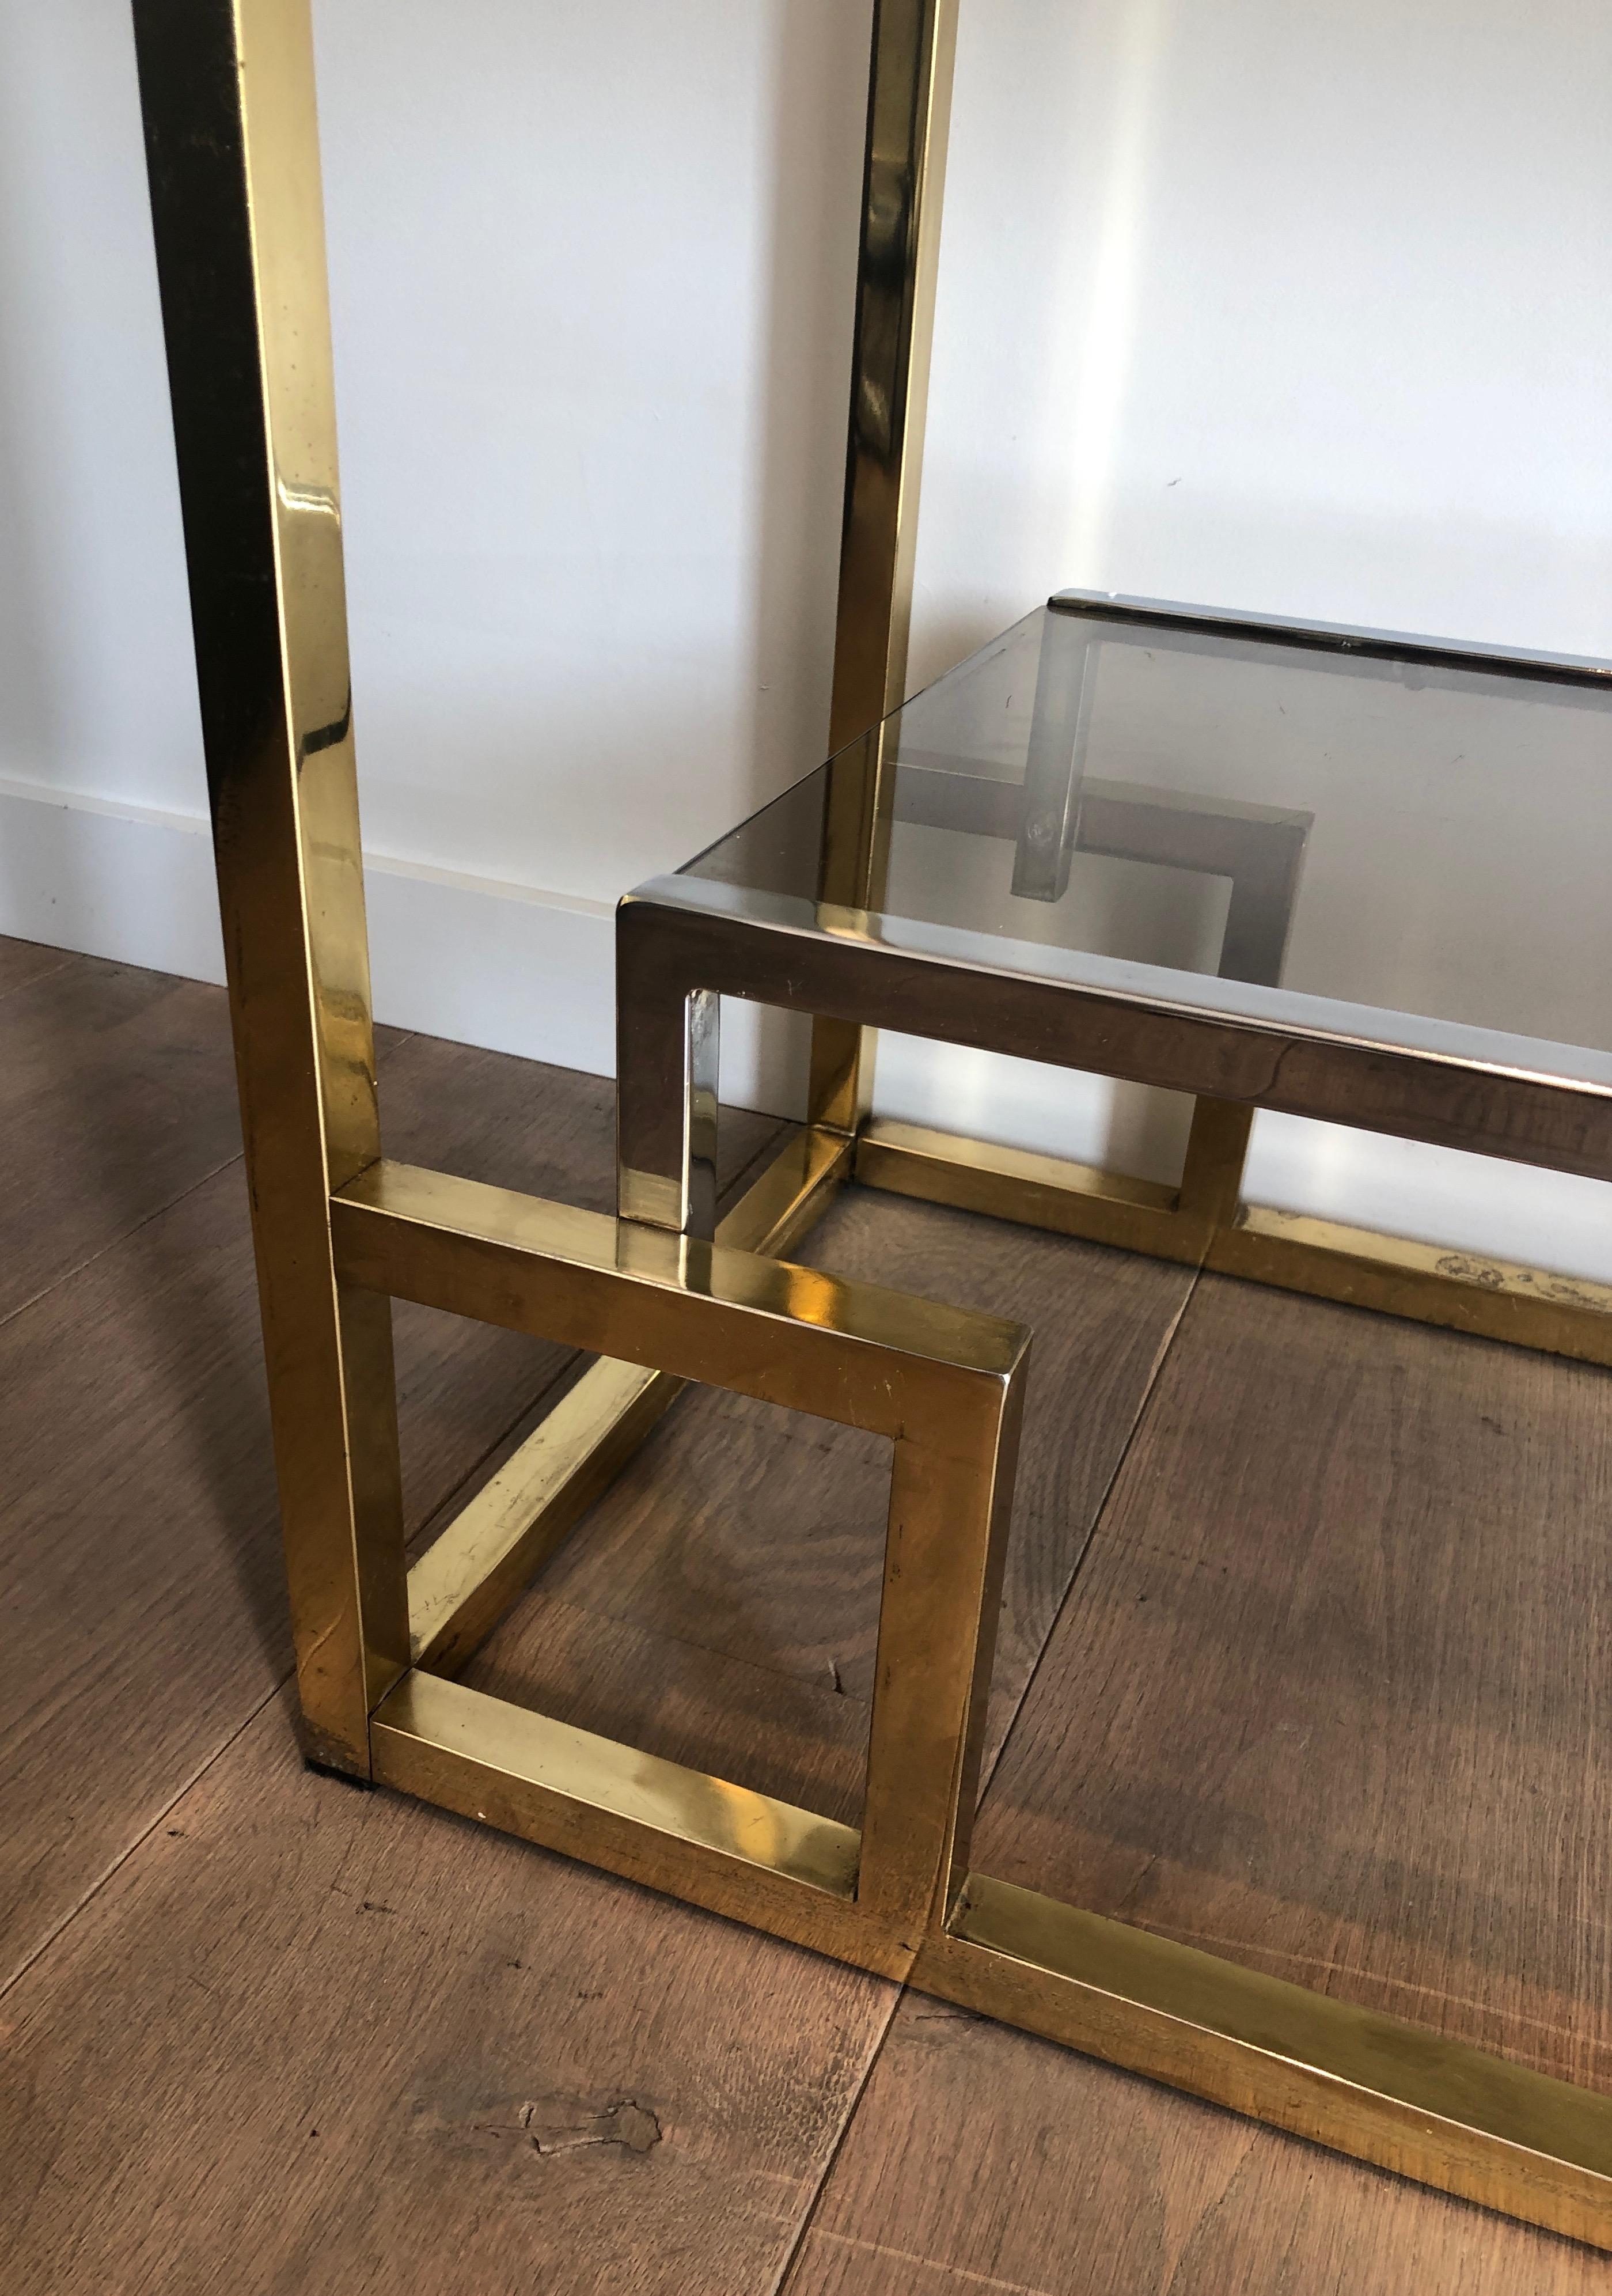 Late 20th Century Chrome and Gilt Chrome Shelves Unit In the Style of Willy Rizzo